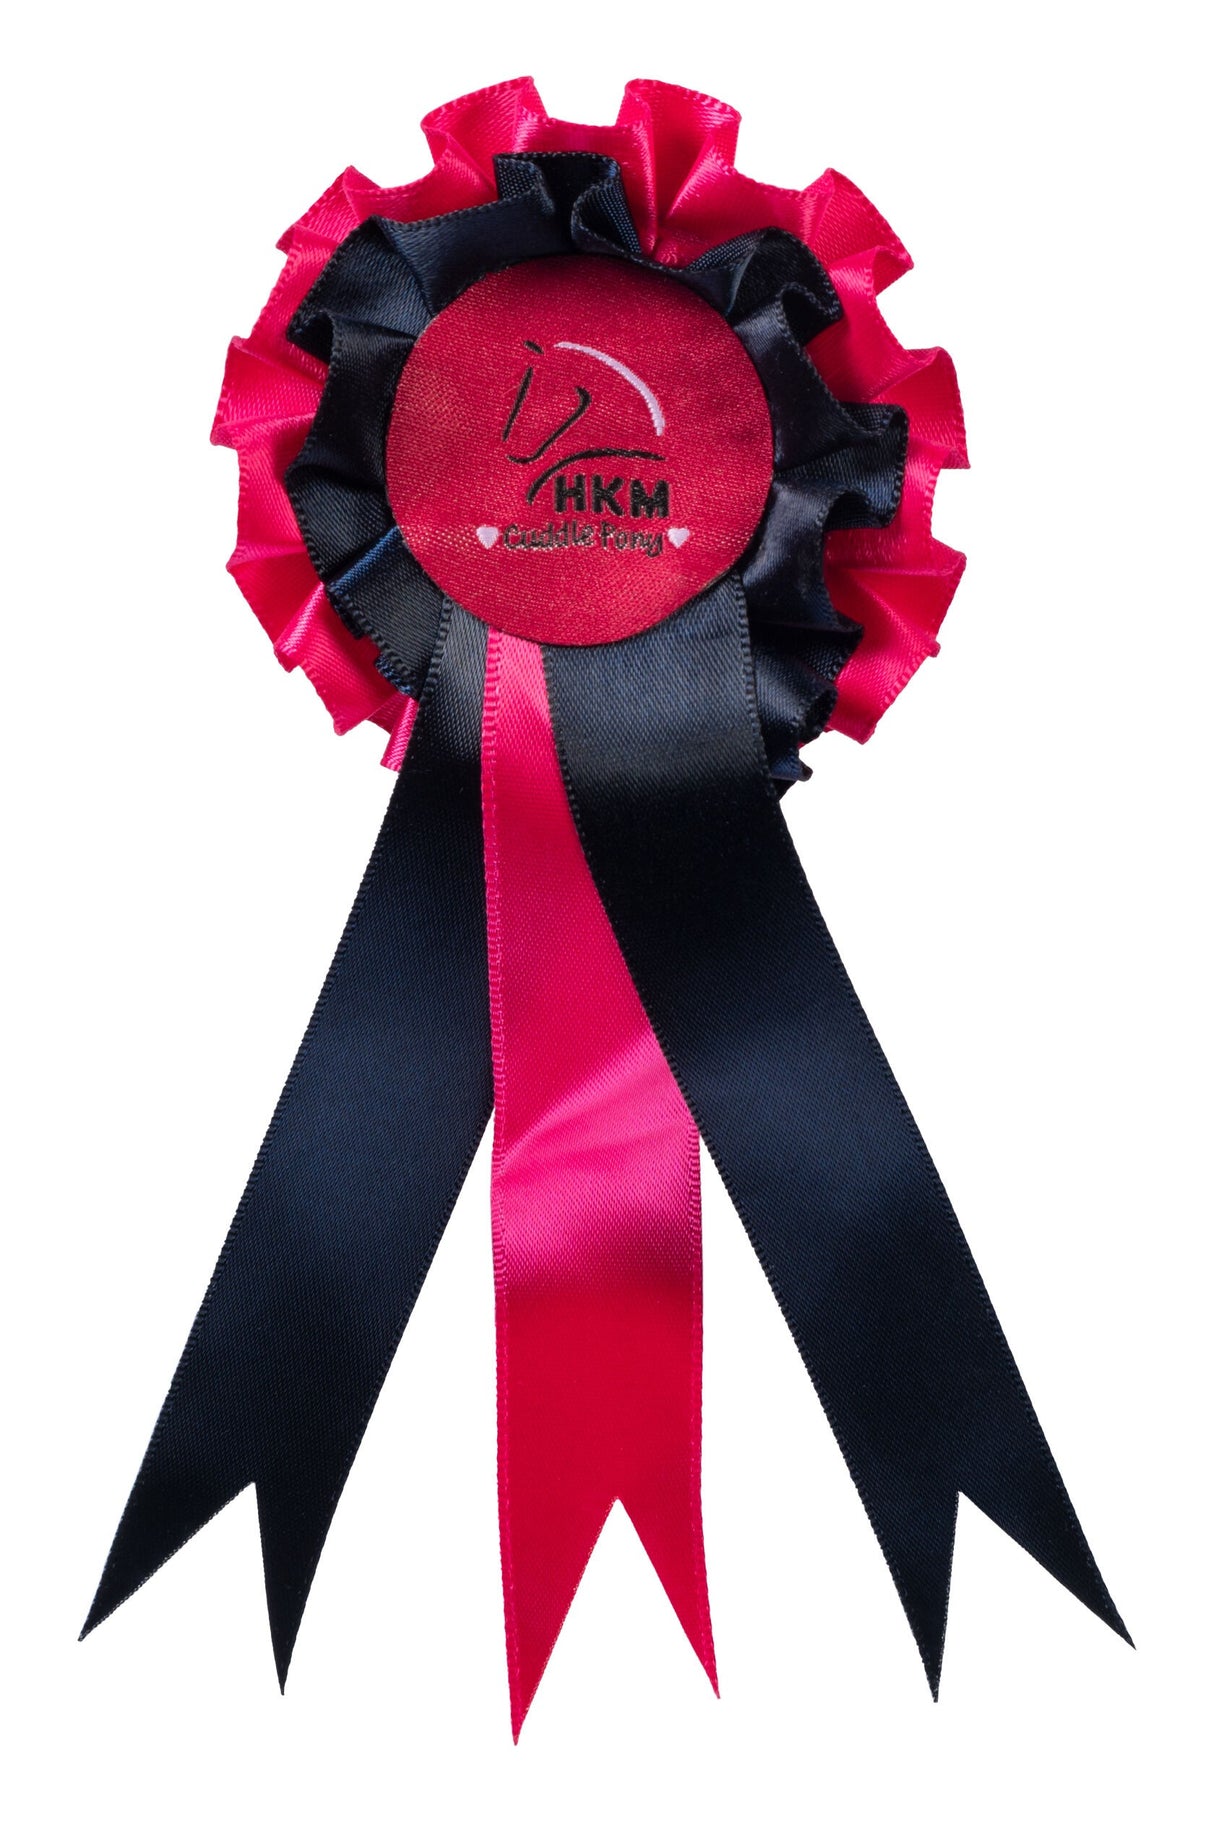 HKM Competition Rosette -Cuddle Pony-